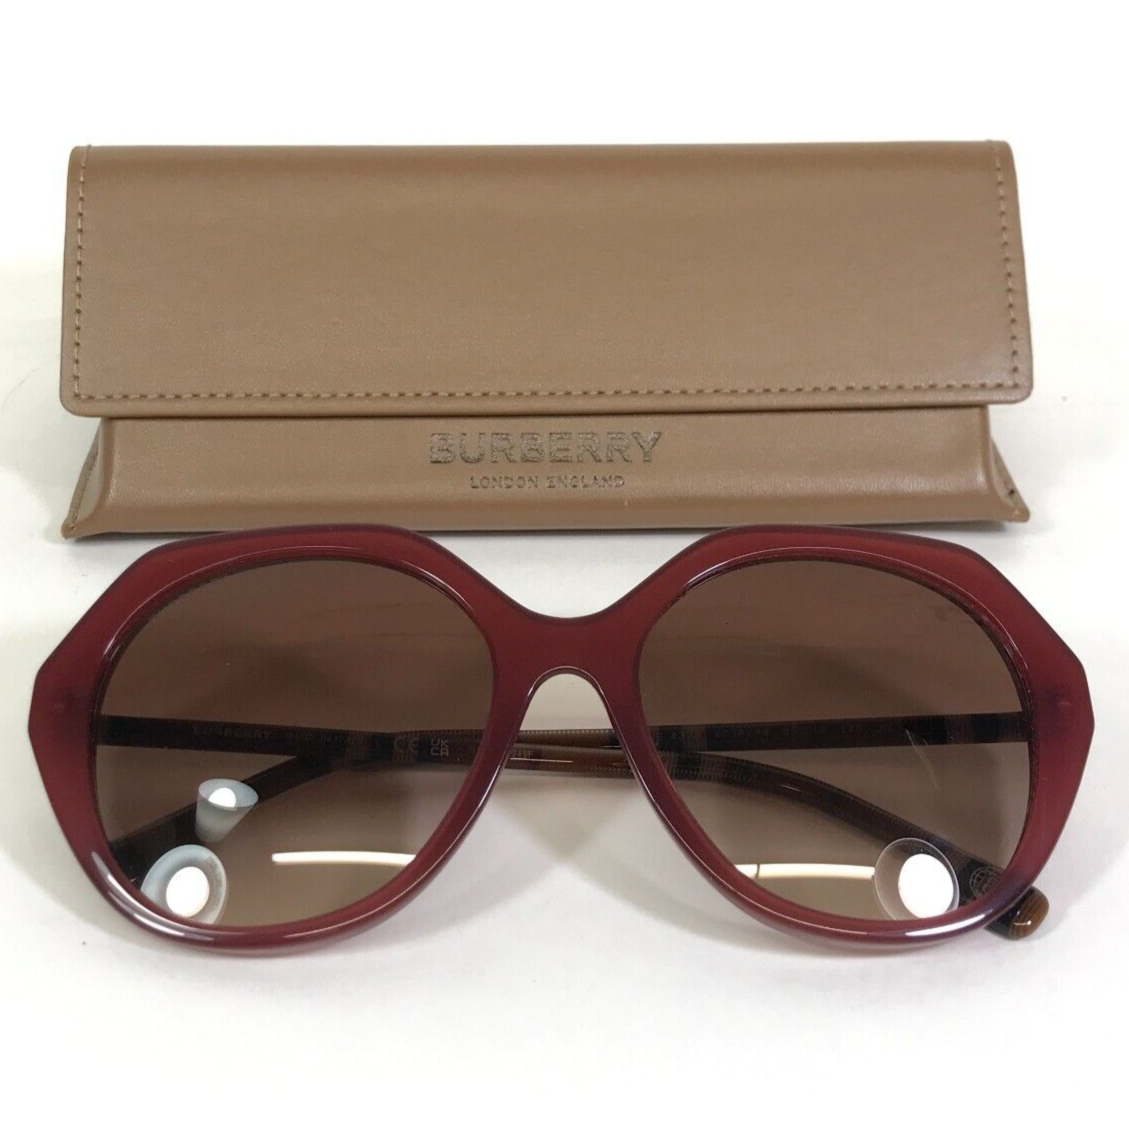 Primary image for Burberry Sunglasses B 4375 4018/13 Brown Red Hexagon Frames with Brown Lenses